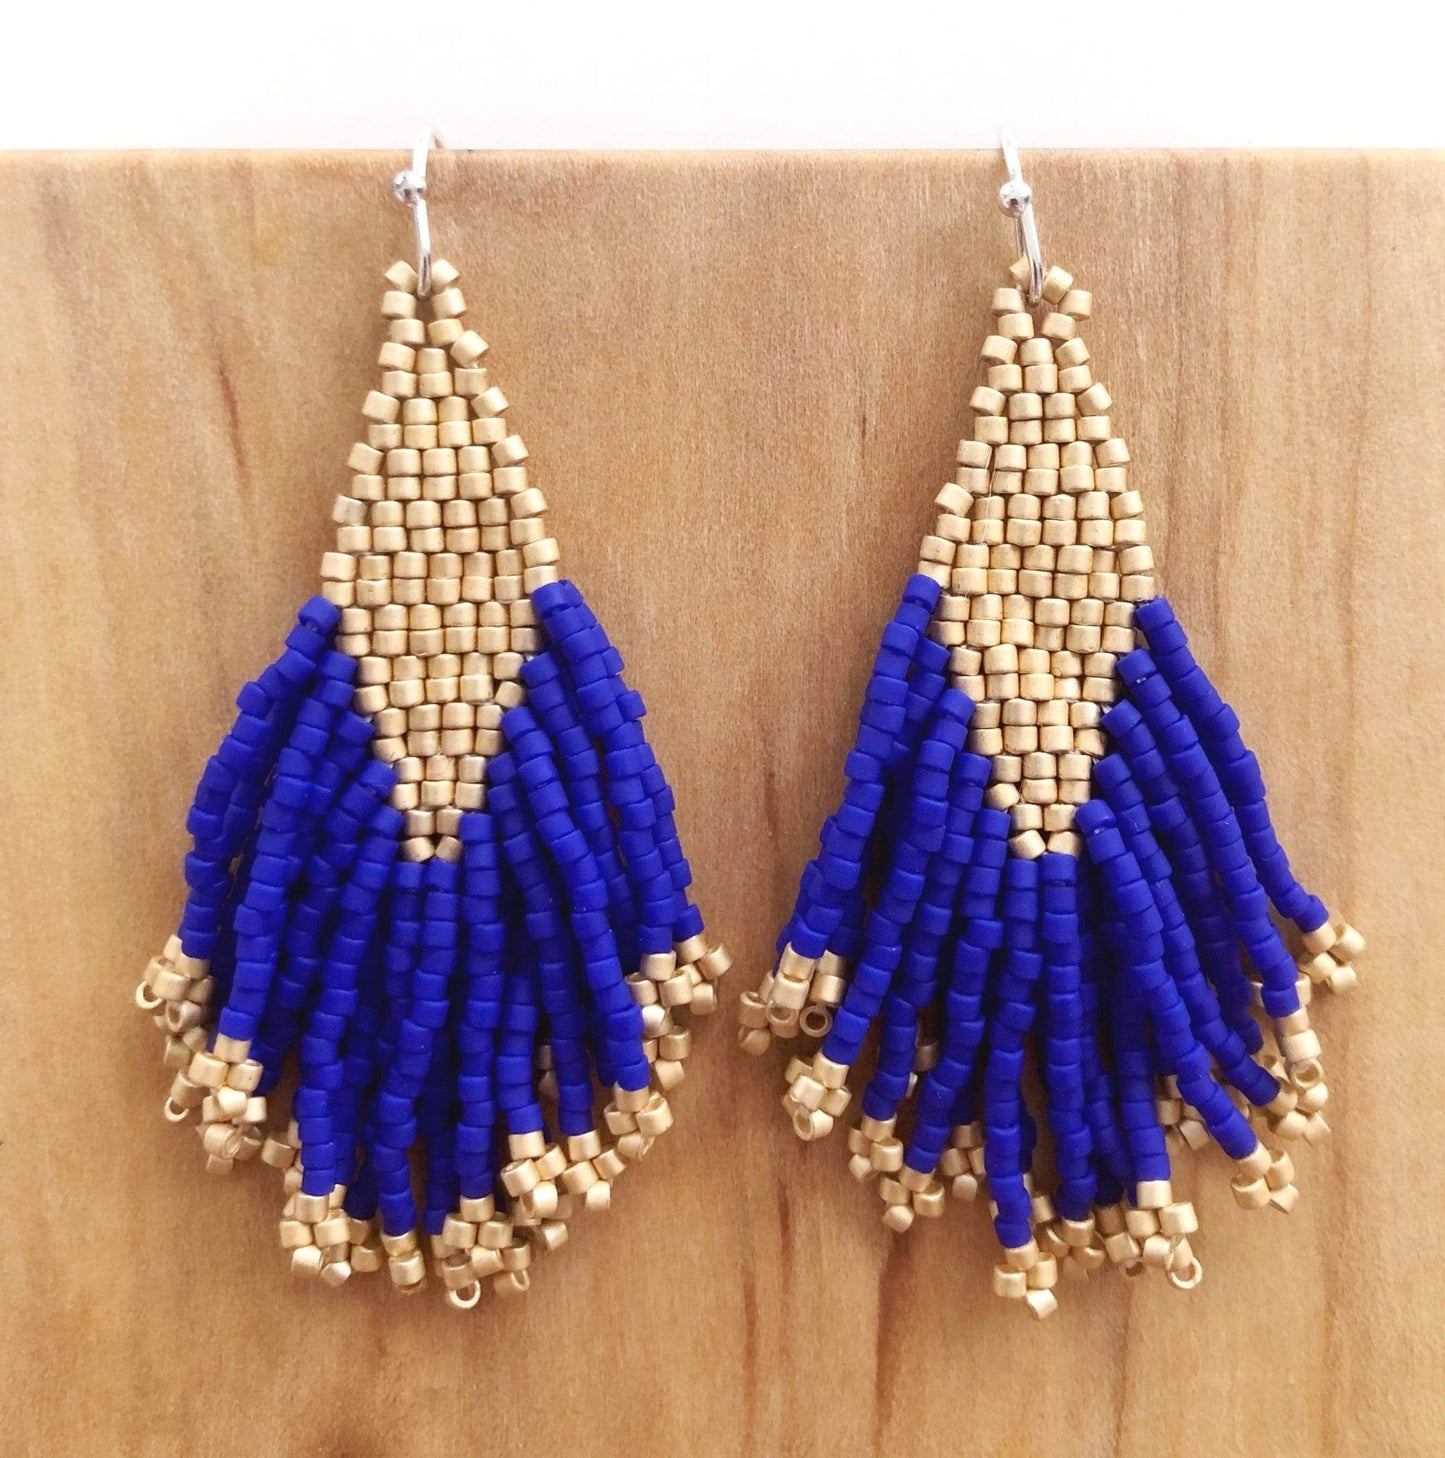 Load image into Gallery viewer, Lillie Nell Sokko Hasimbish Earrings in Cobalt
